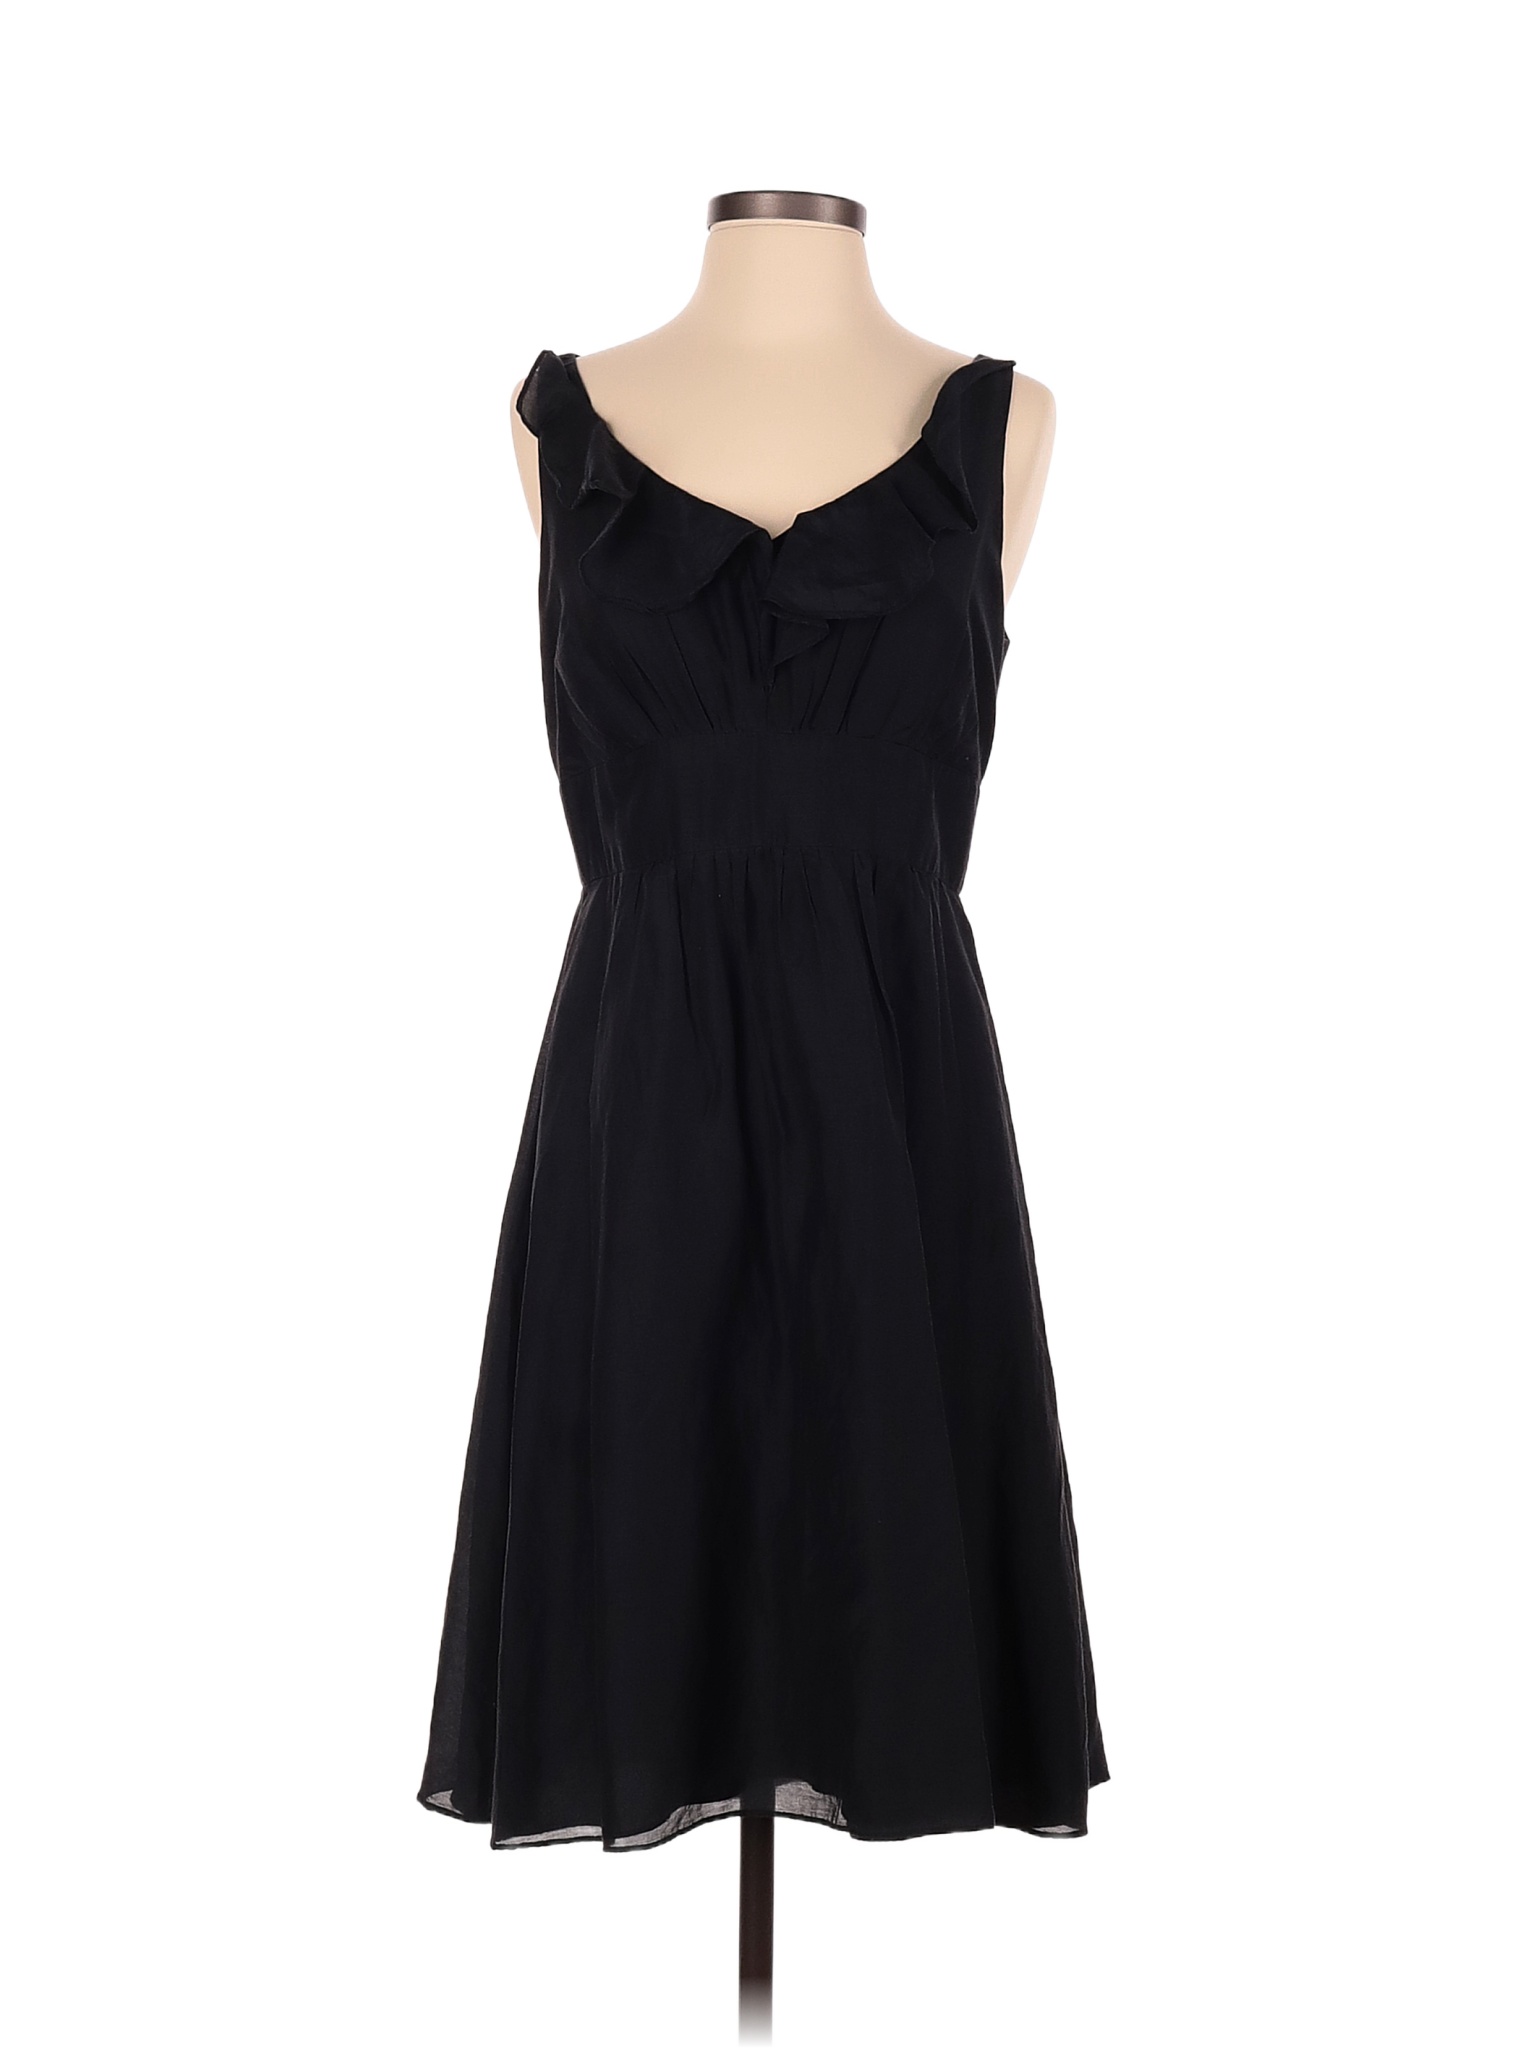 White House Black Market Solid Black Casual Dress Size 6 - 75% off ...